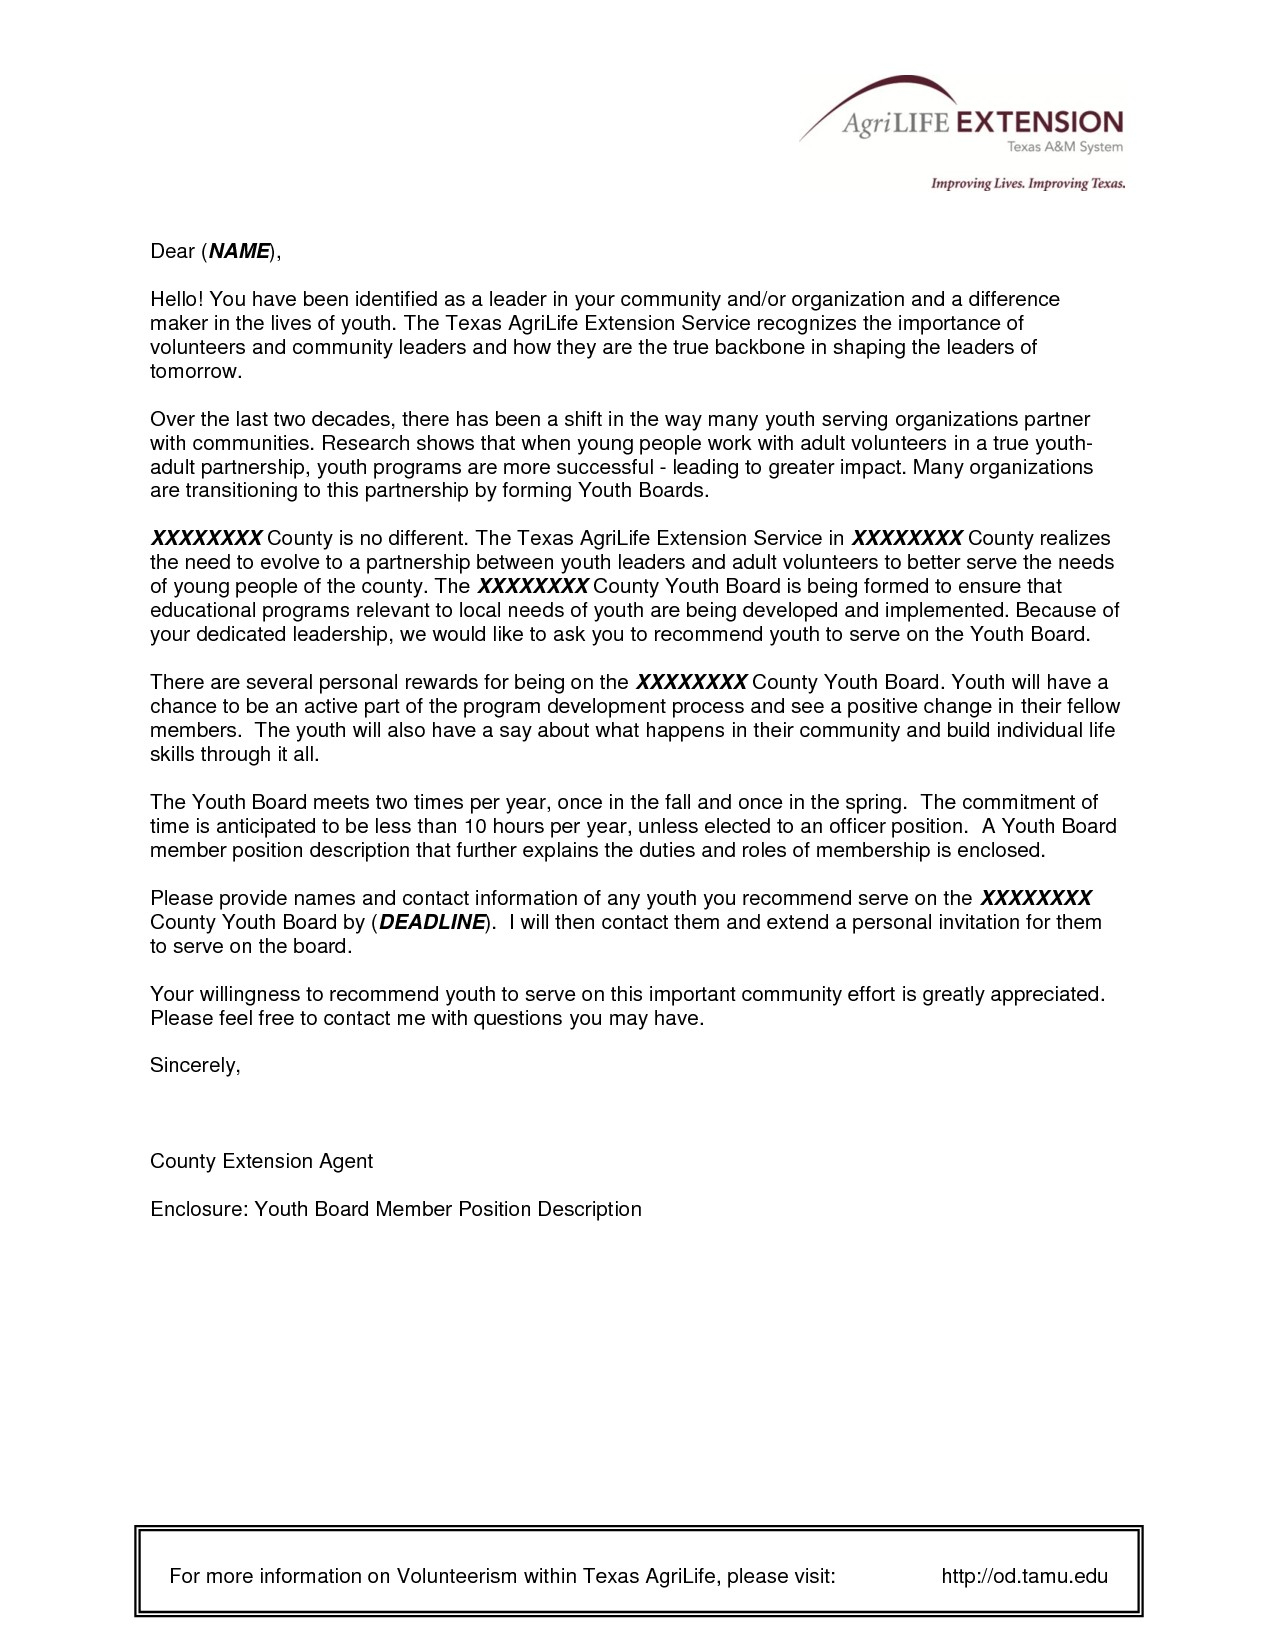 Generic Letter Of Recommendation Template - Writing A Re Mendation Letter for A Job